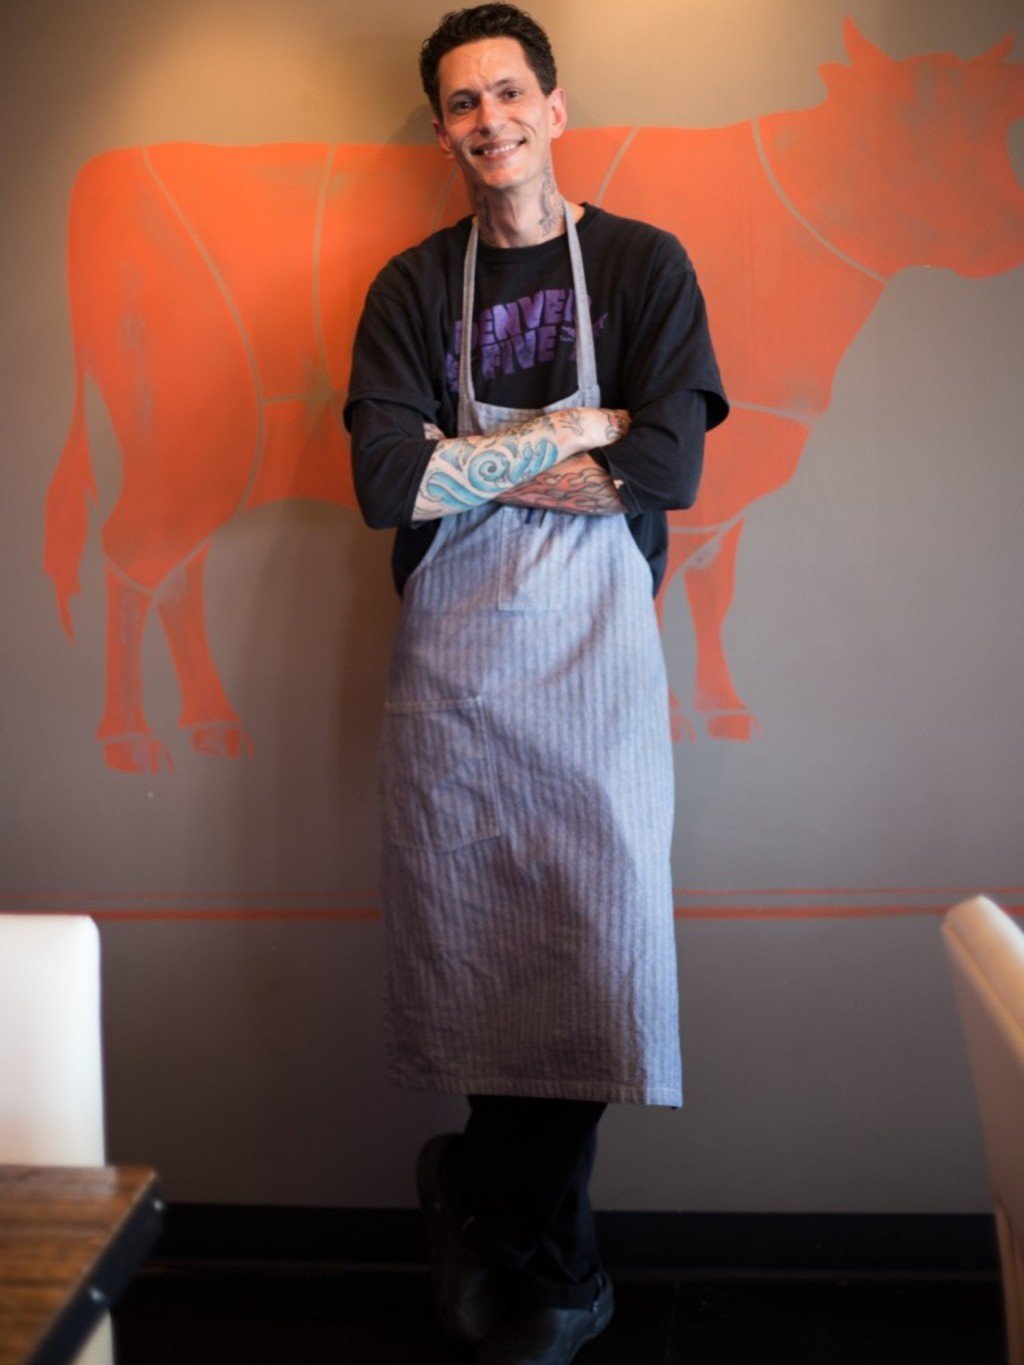 Chef Matt Selby. Photo by Camille Breslin.